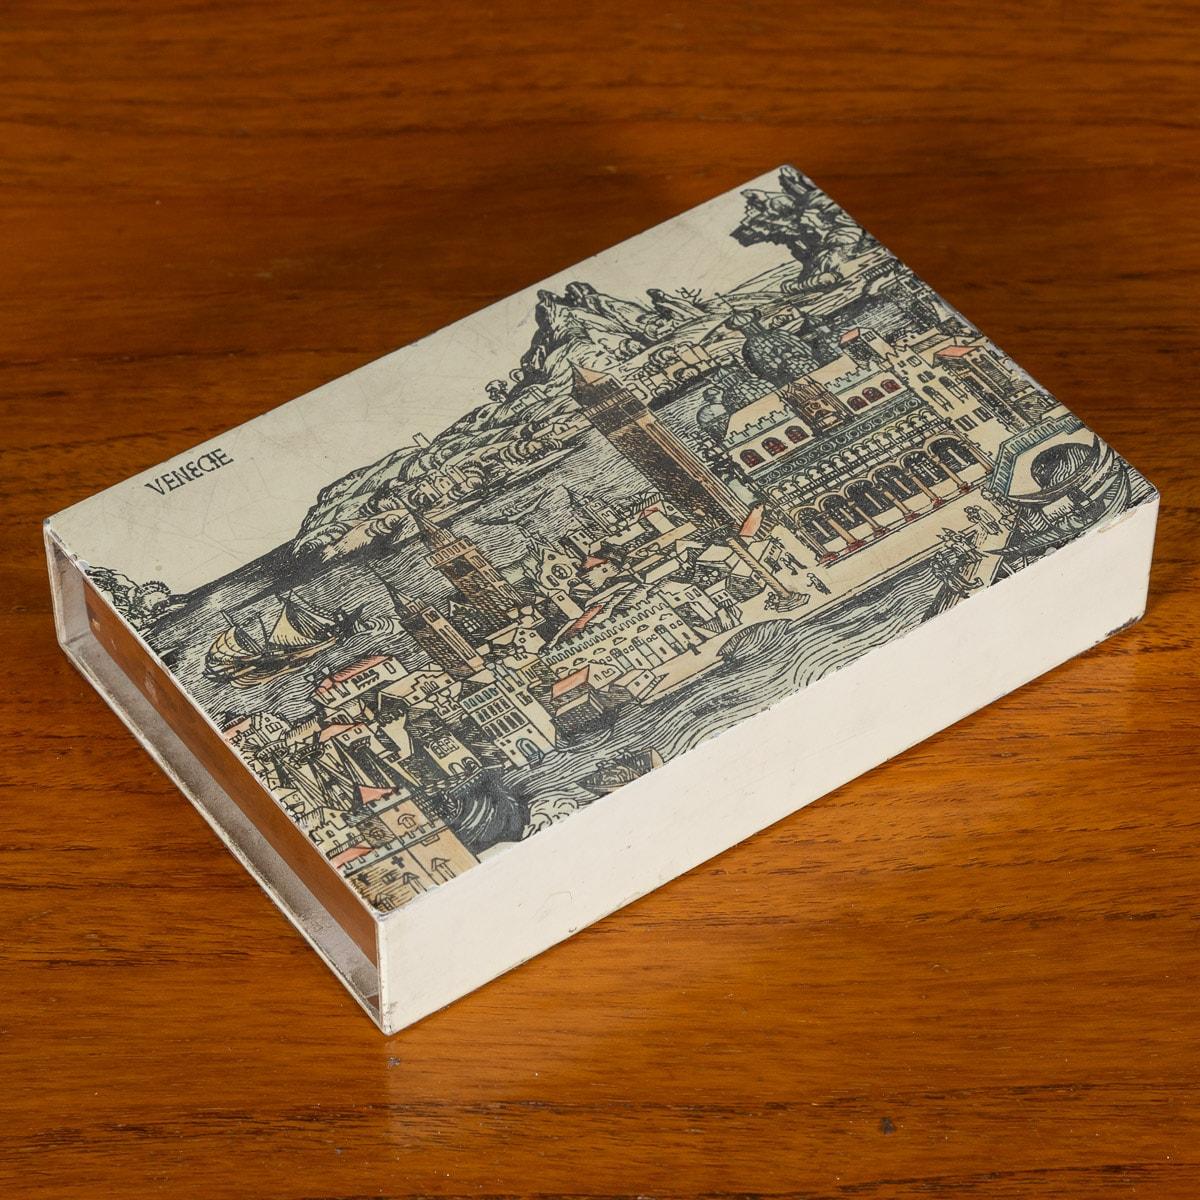 A rare matchbox or trinket box by Piero Fornasetti, made in Italy, circa 1960s / 1970s. The lacquered exterior is decorated with a traditional scene of Venice, the interior made with a cedar wood interior slide. These increasingly rare and